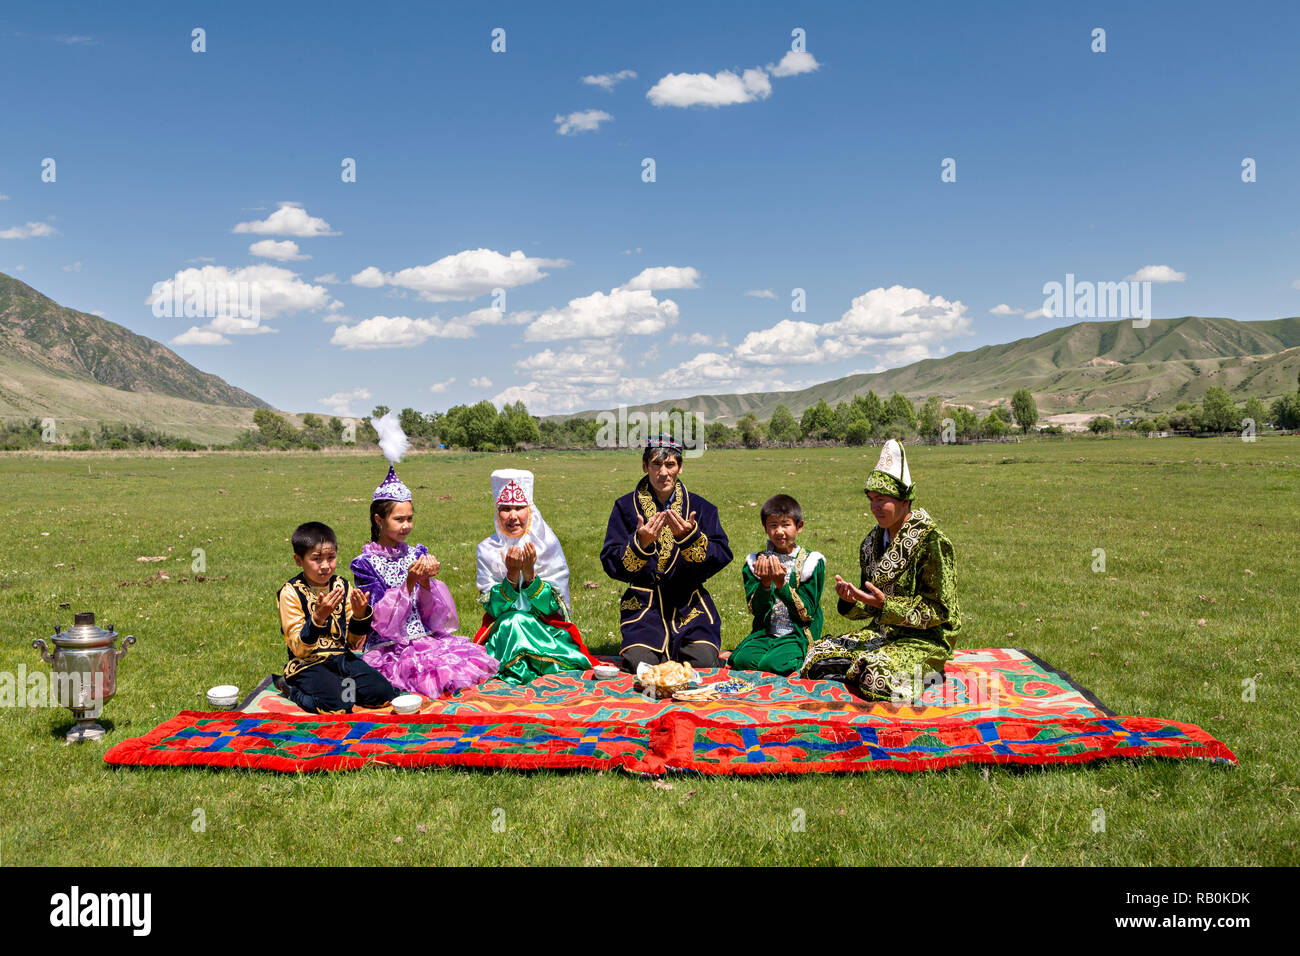 Kazakh family praying all together before they start having their picnic lunch in Saty Village, Kazakhstan. Stock Photo